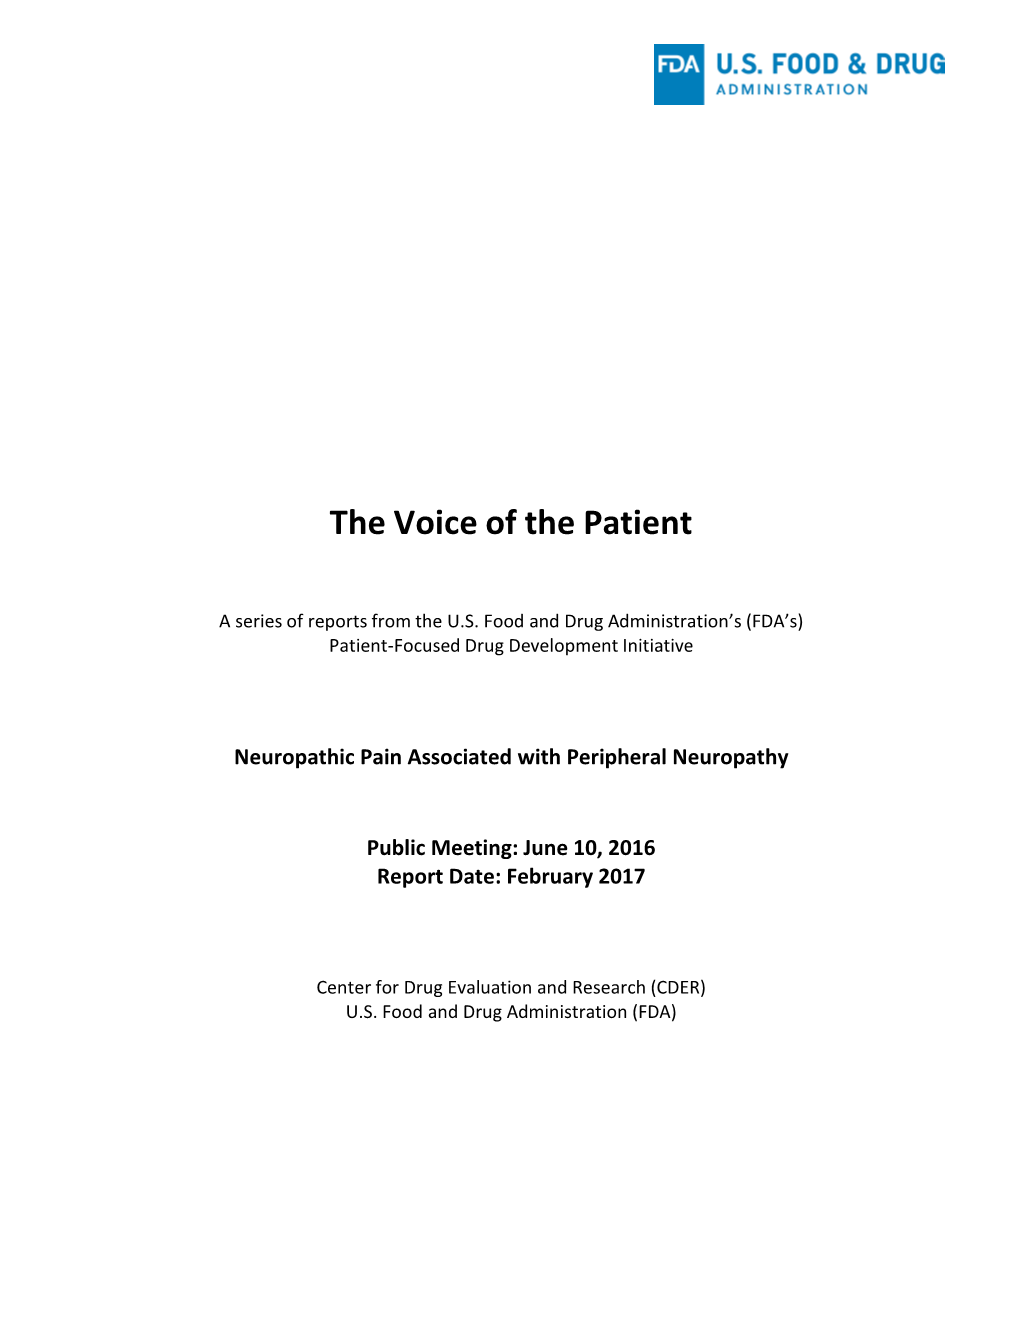 The Voice of the Patient: Neuropathic Pain Associated with Peripheral